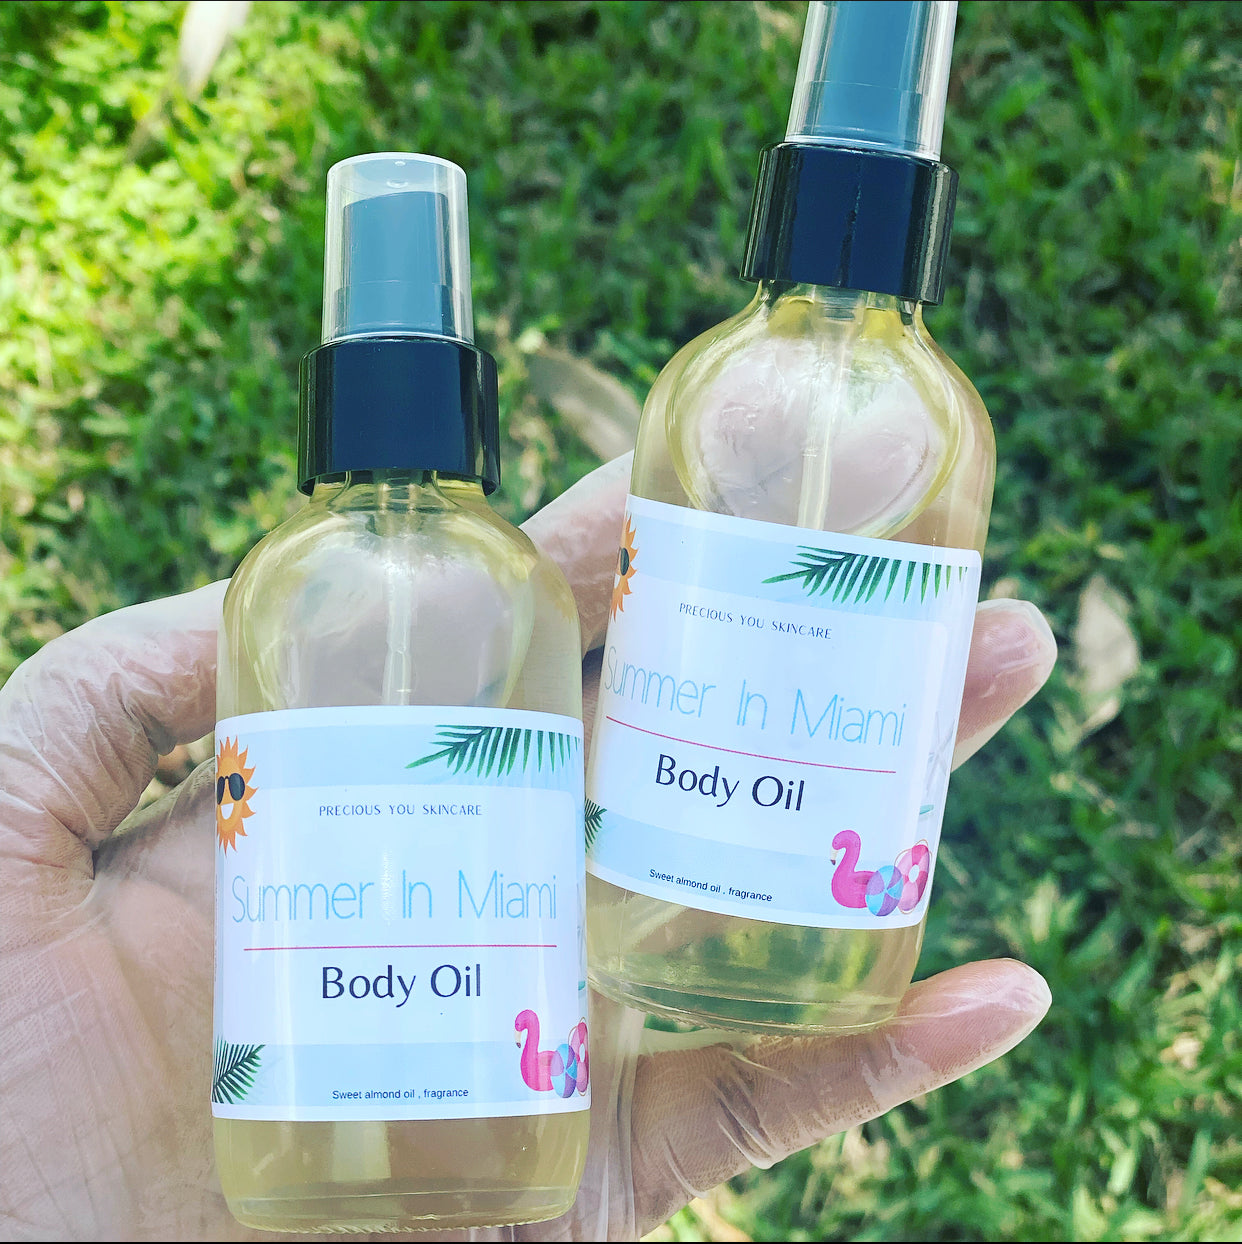 Summer in Miami body oil - Passionfruit & Violet